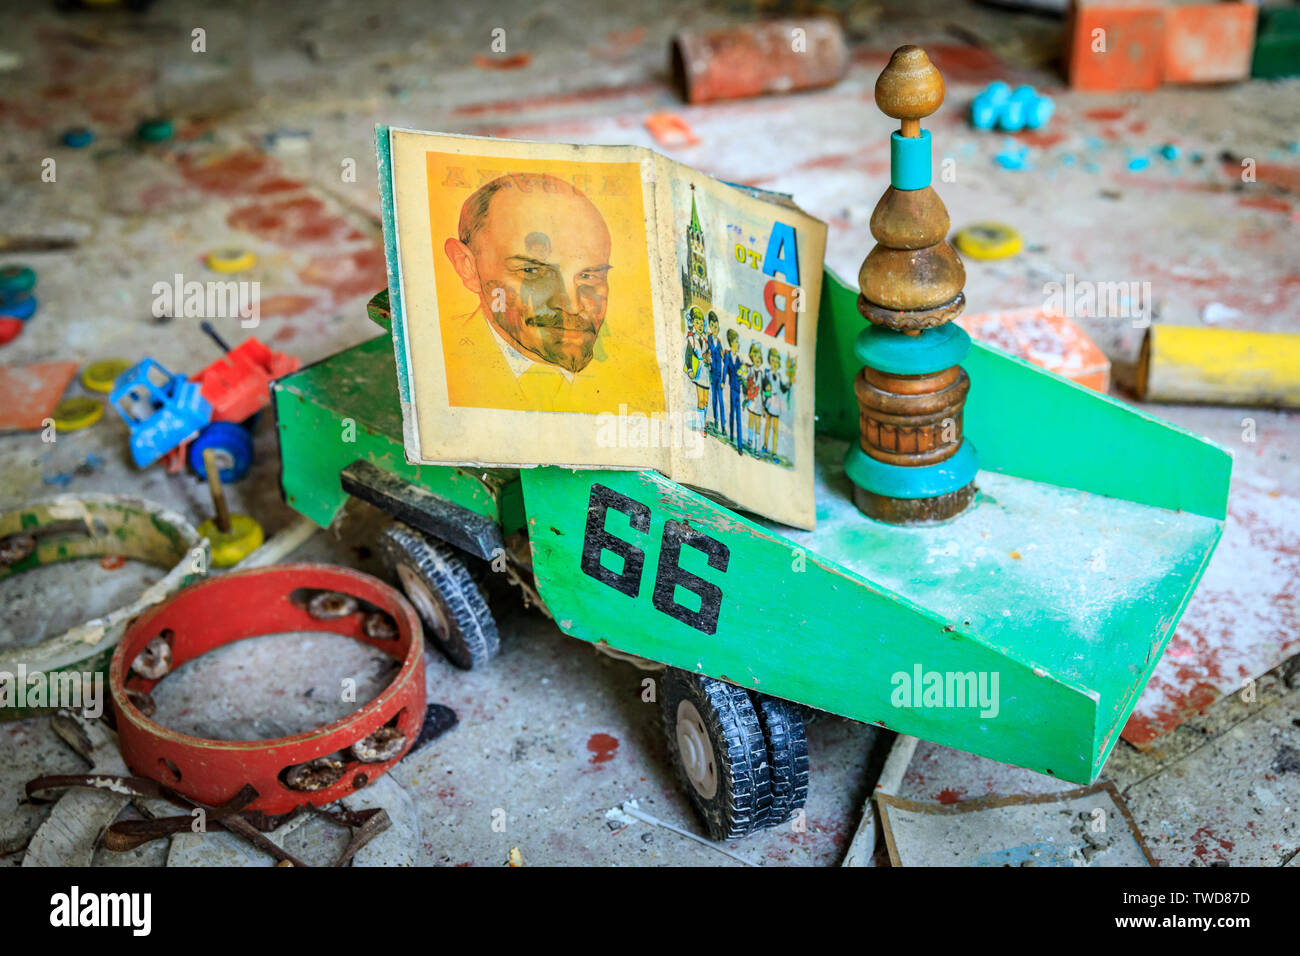 Eastern Europe, Ukraine, Pripyat, Chernobyl. Toys in the kindergarten. Children's book with picture of Lenin sits in a dumptruck. April 11, 2018. Stock Photo